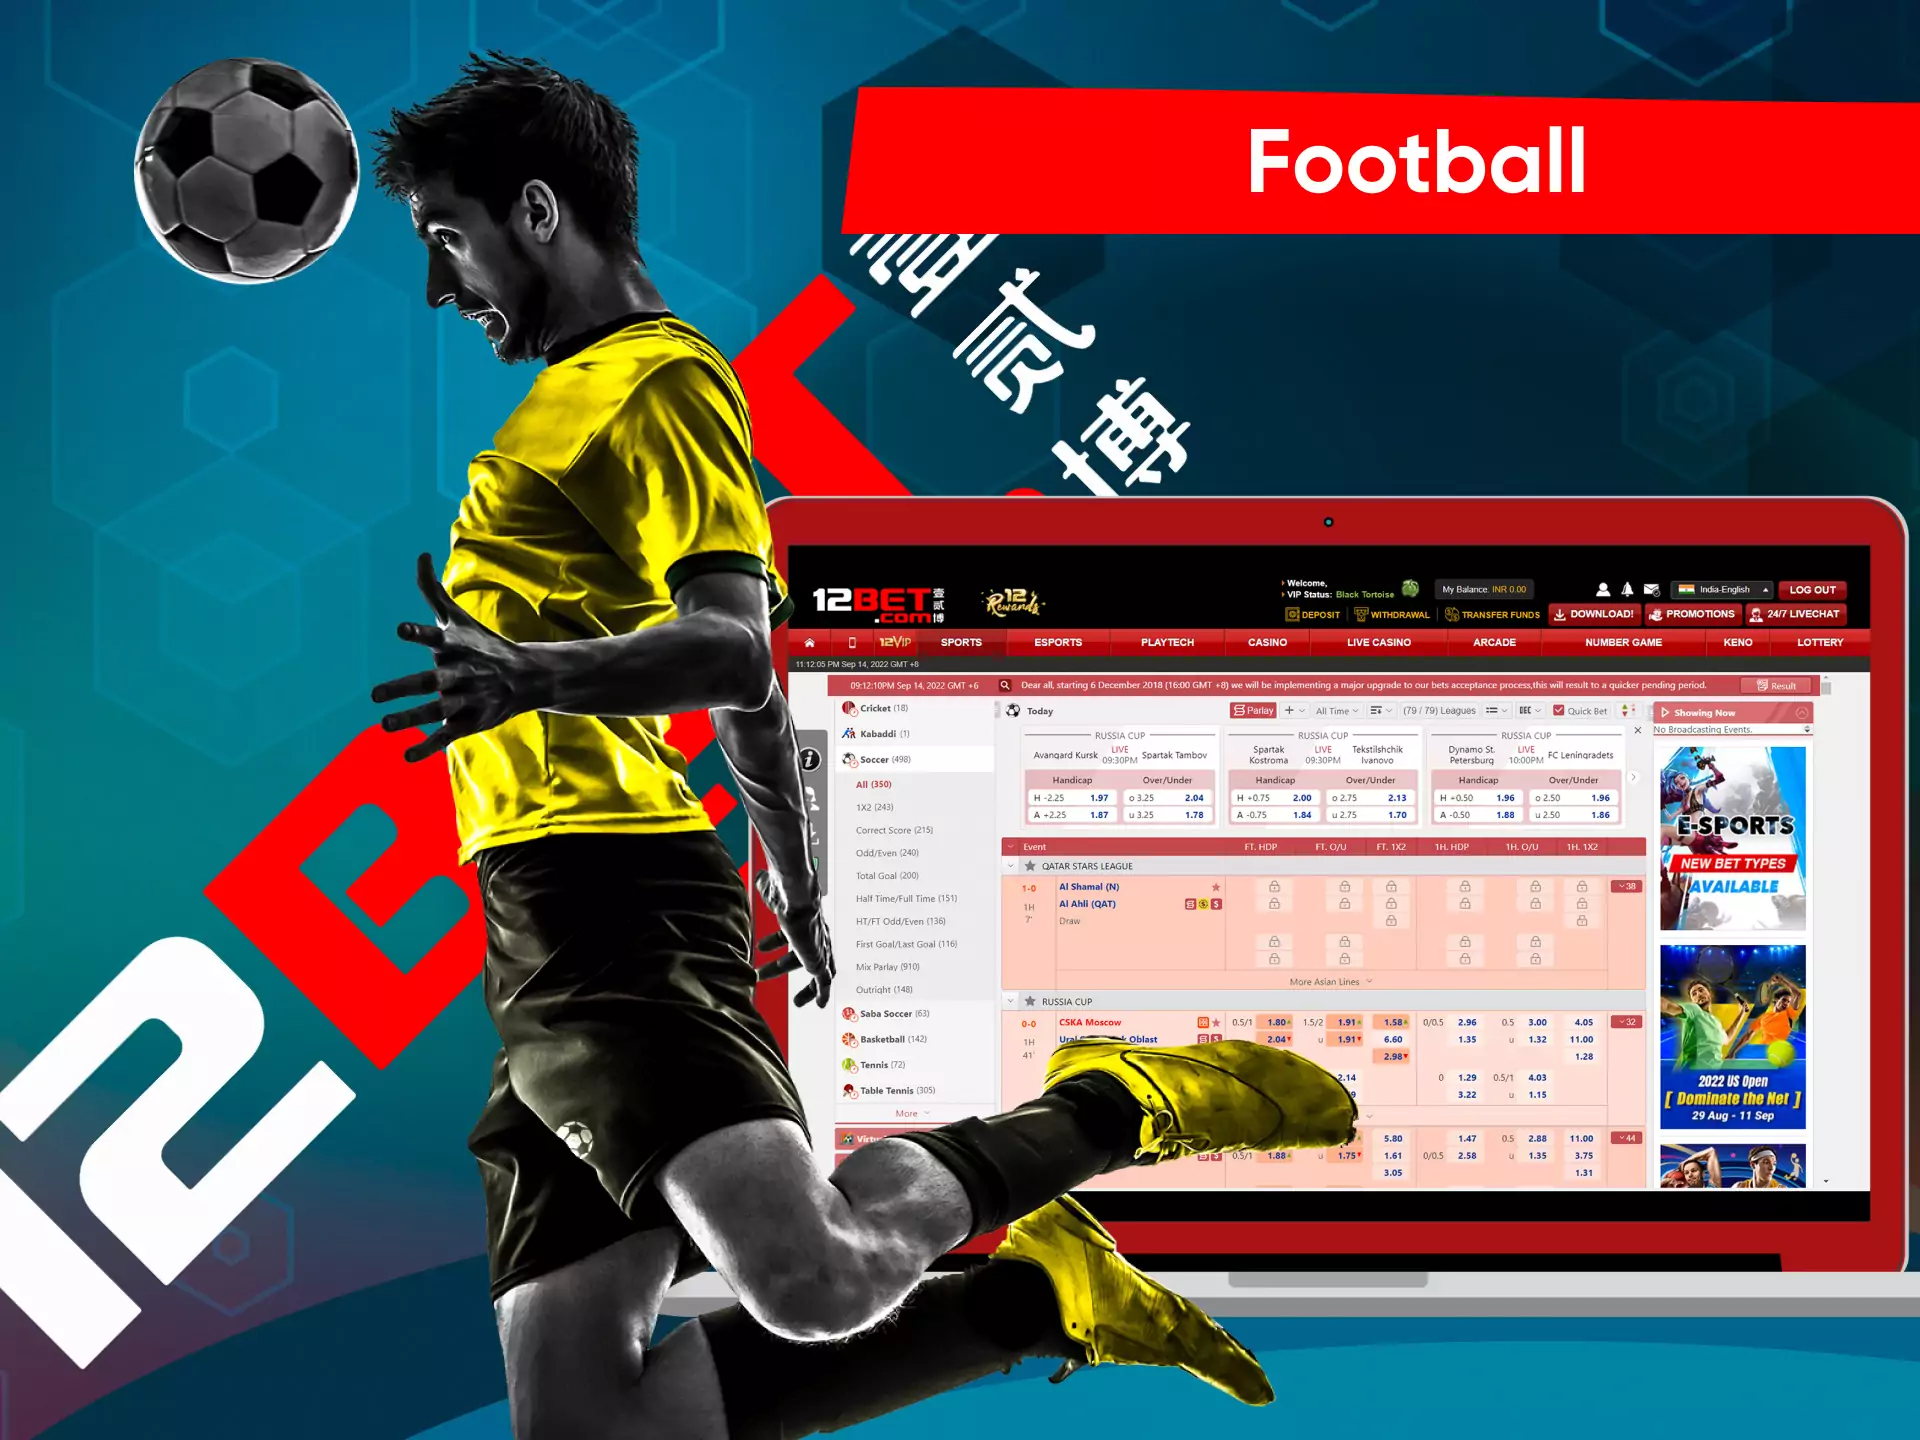 Football betting is a quite popular activity on 12bet.